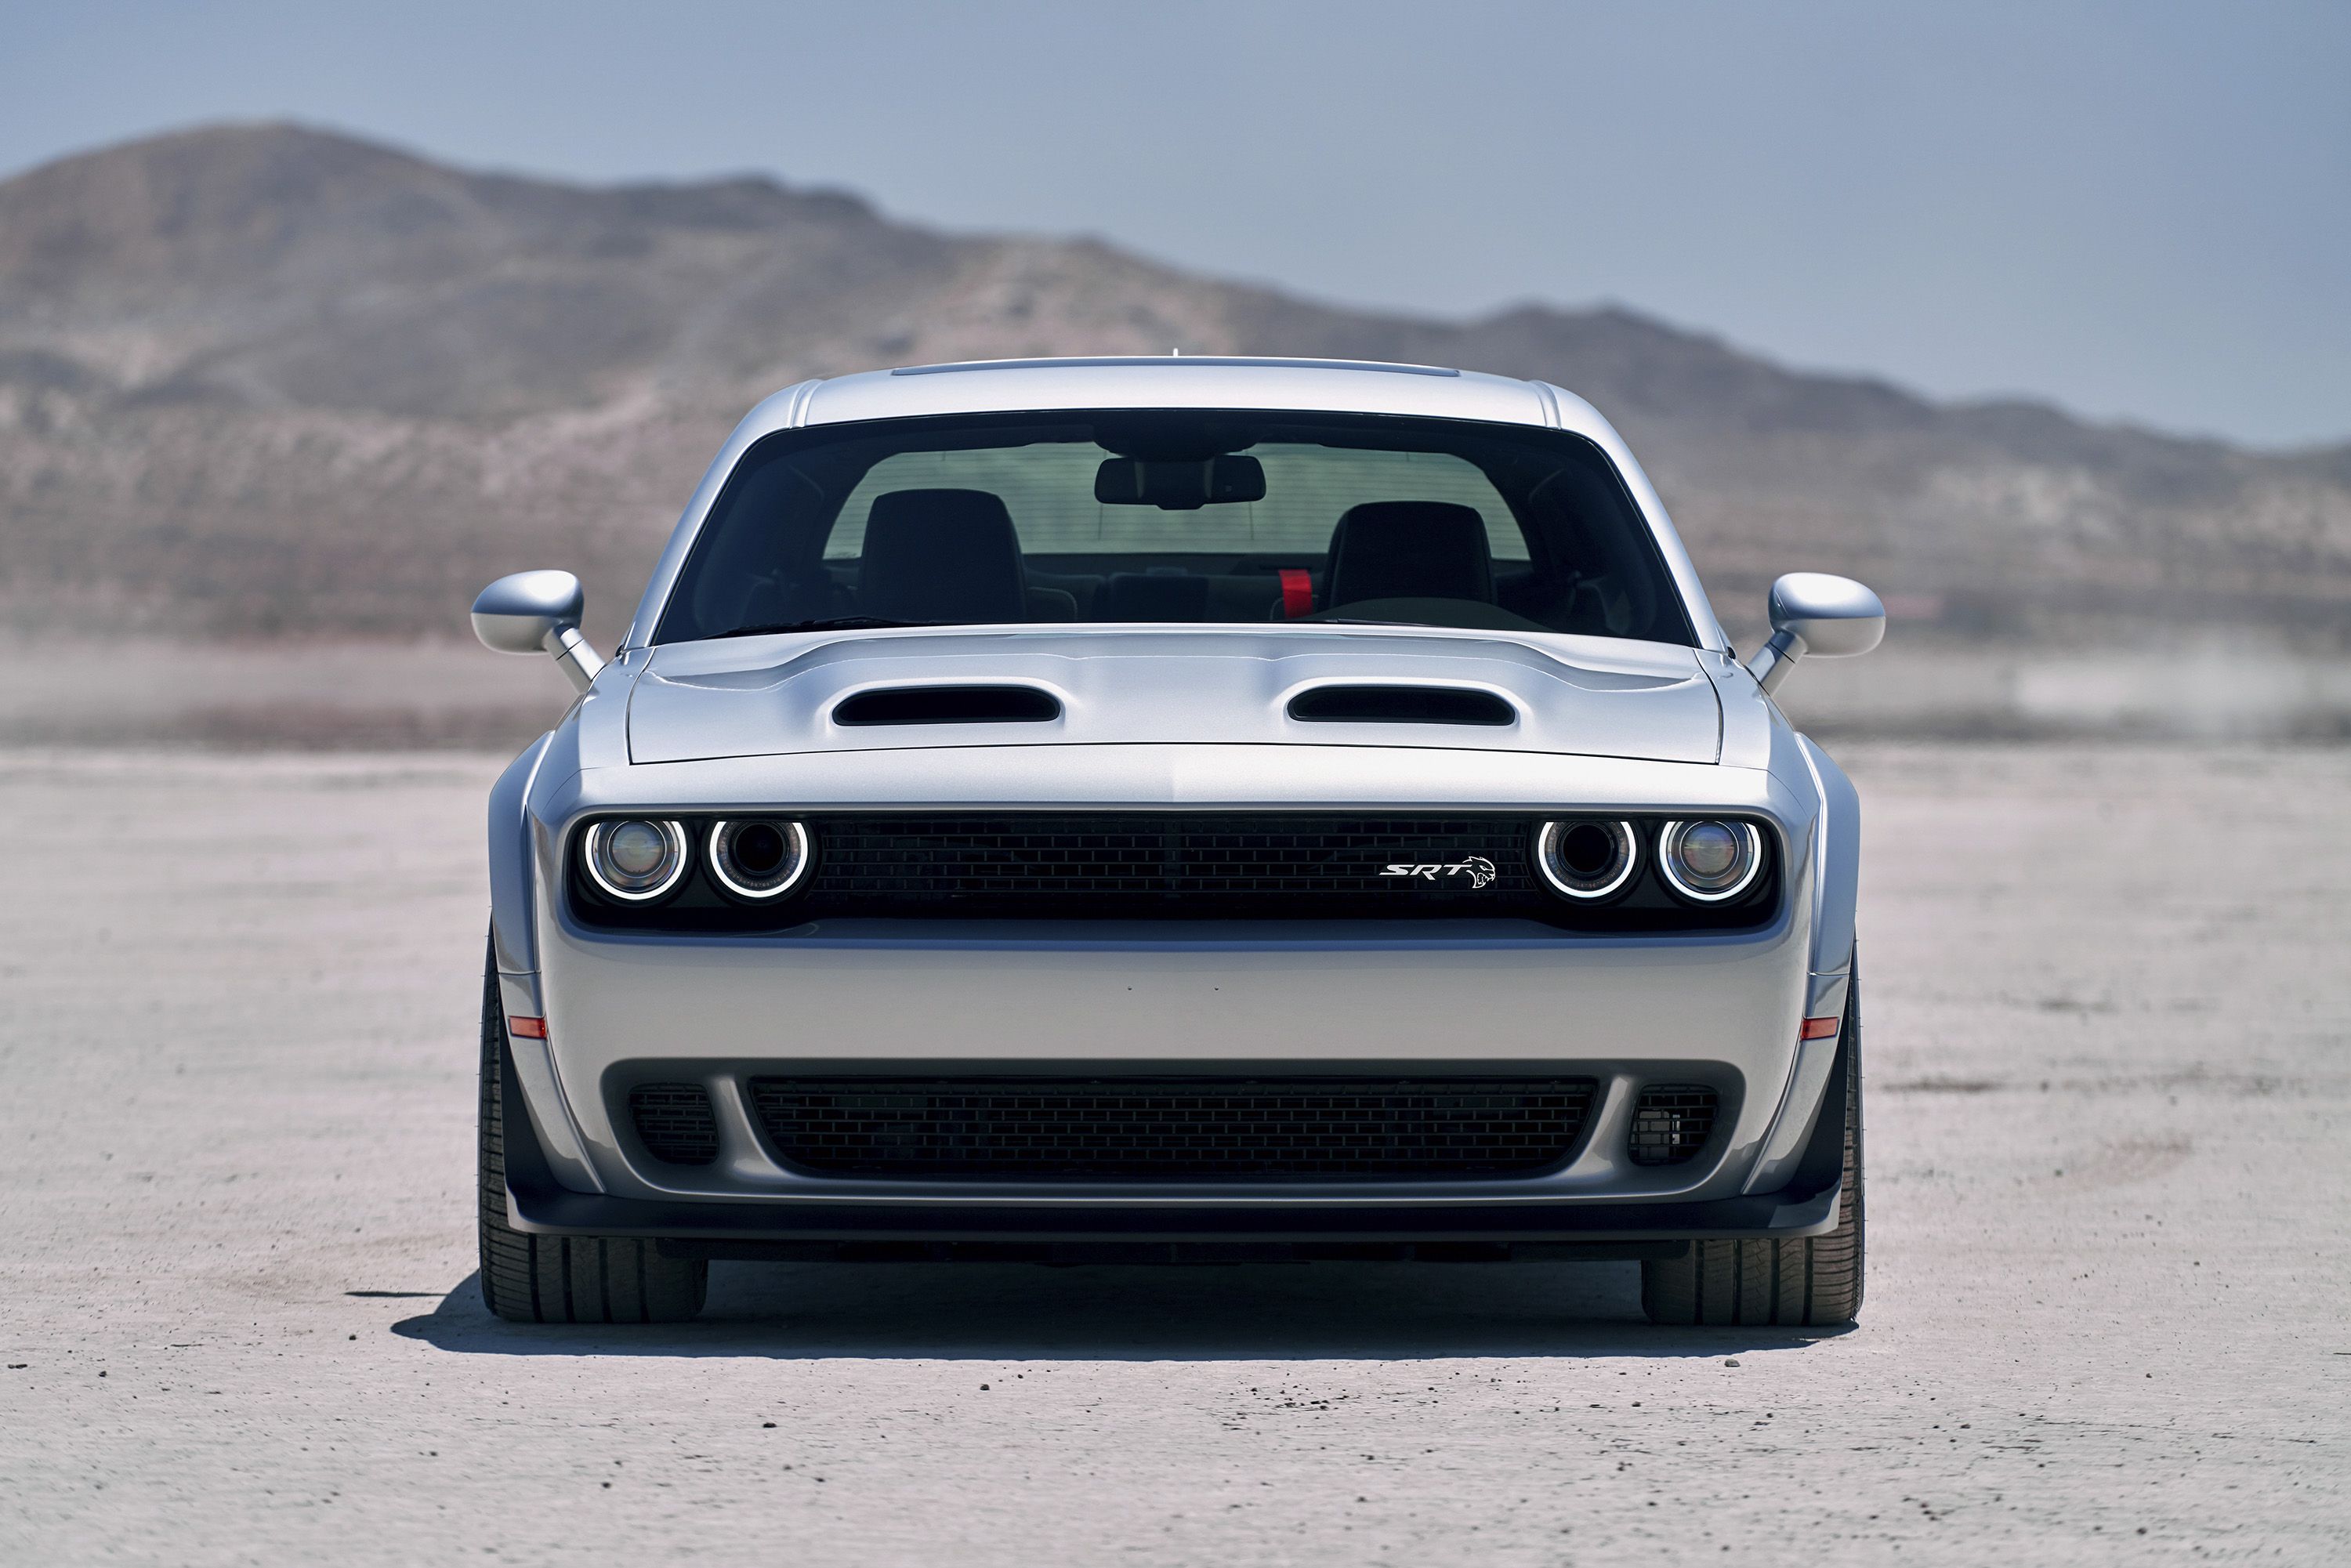 Dodge Challenger SRT Hellcat Redeye Is Now The Most Powerful Muscle Car In Production